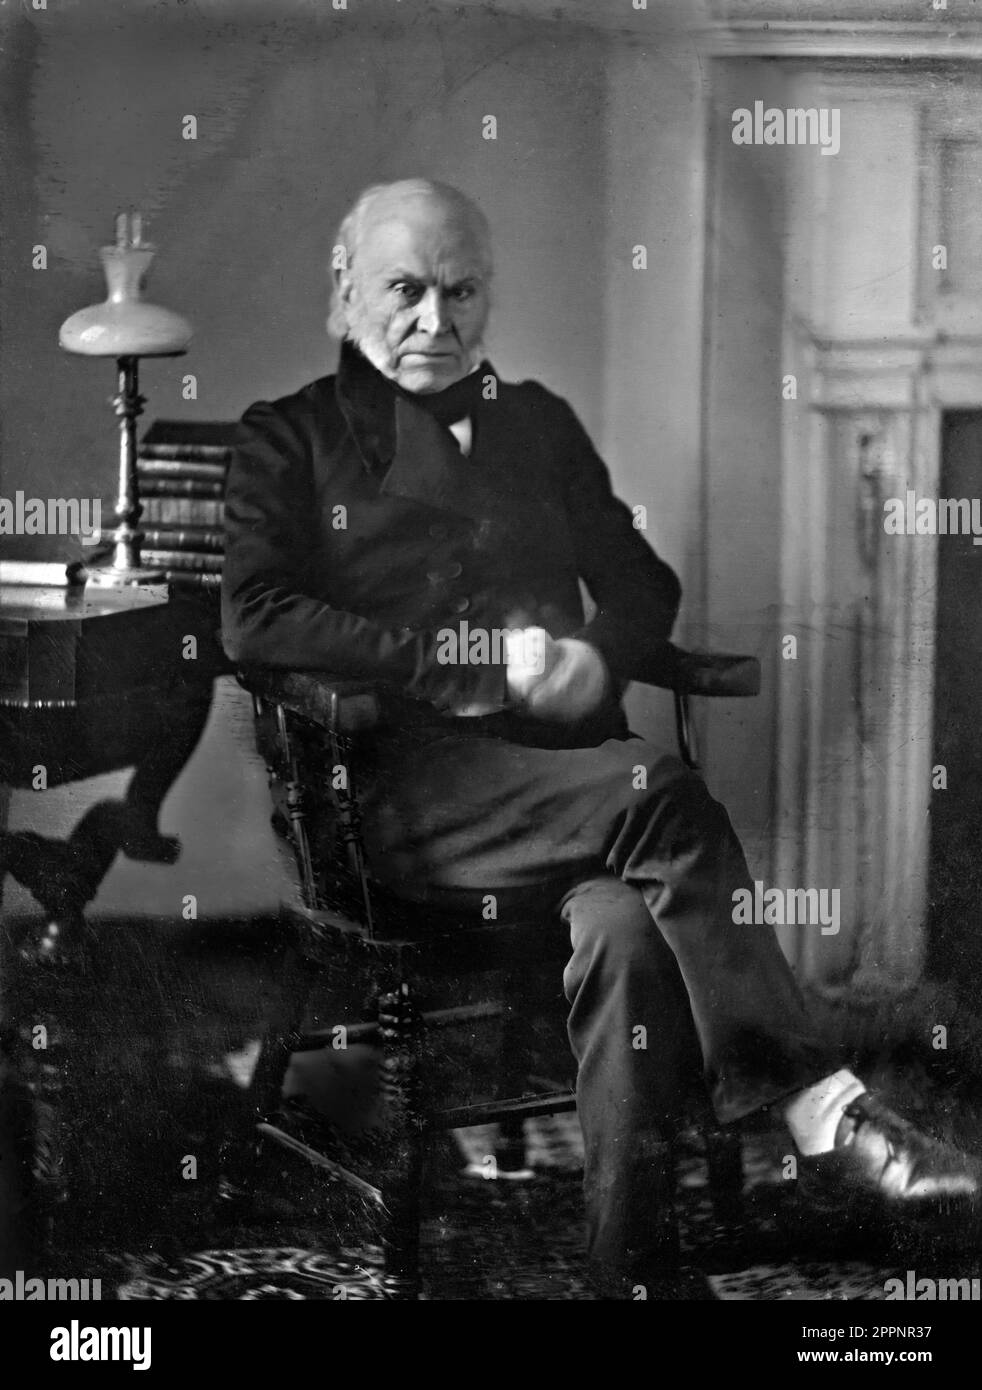 John Quincy Adams (1767-1848), portrait by Philip Haas, 1843. This daguerrotype is the earliest known photograph of an American President. Stock Photo